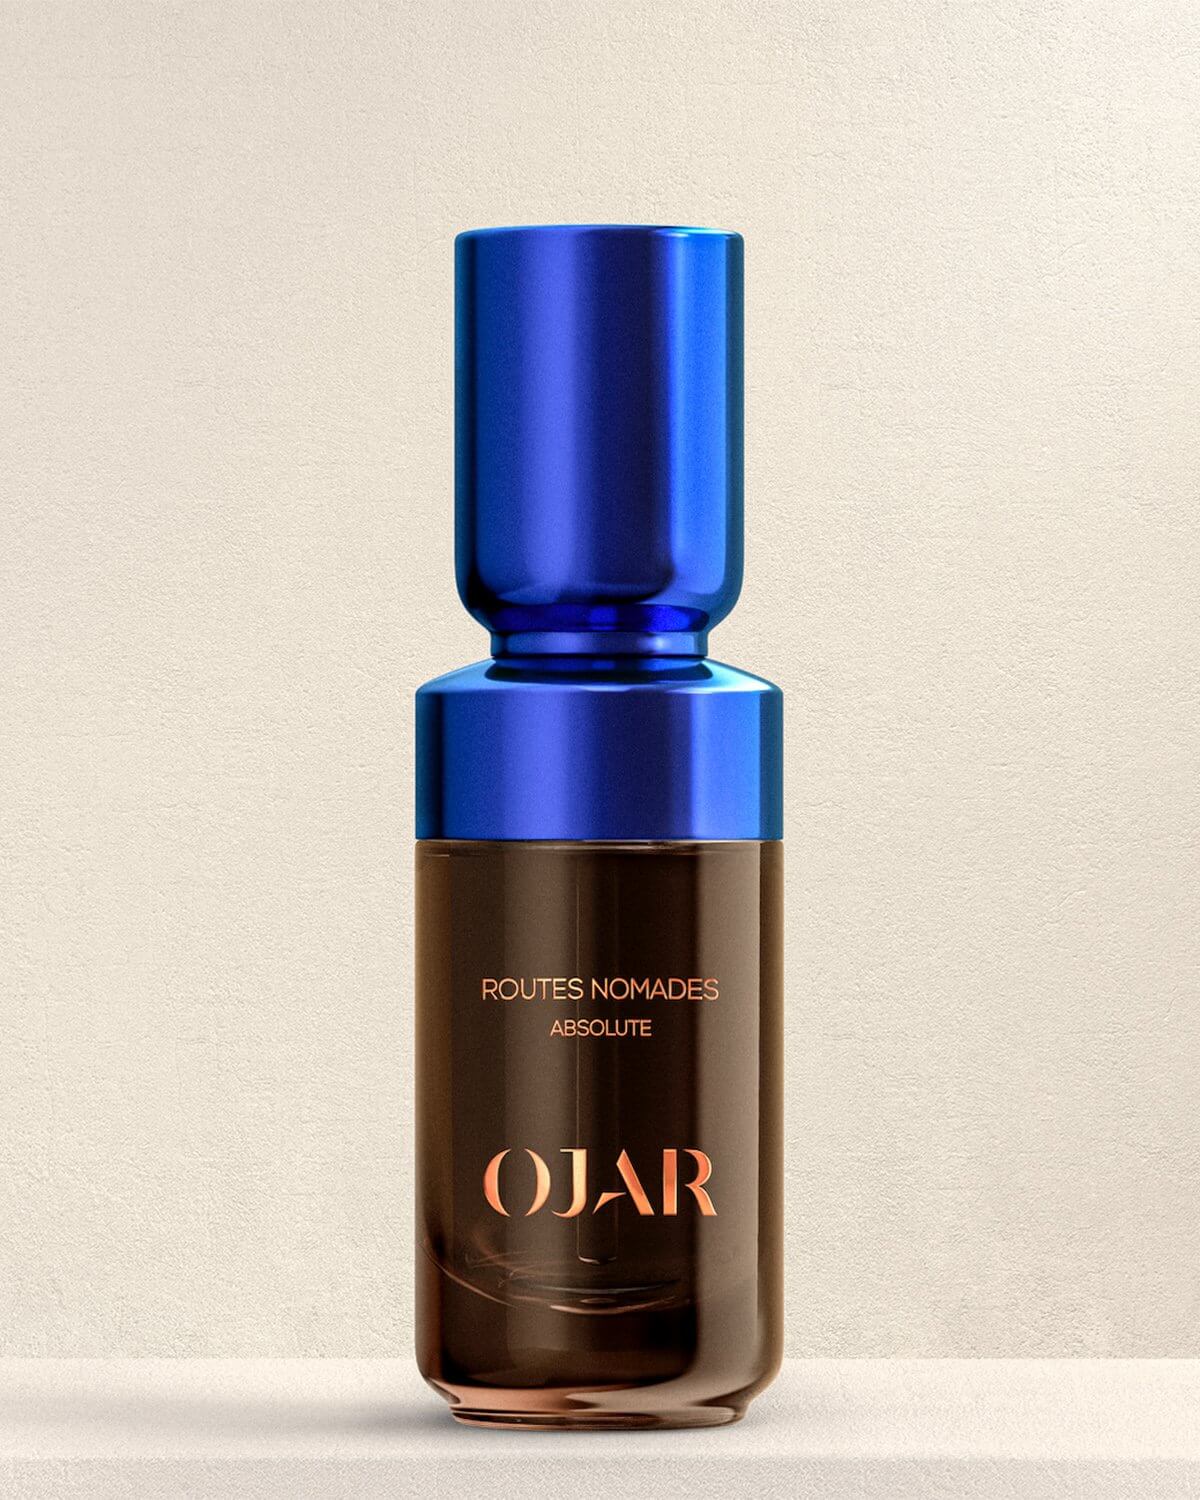 OJAR ROUTES NOMADES PERFUME OIL ABSOLUTE 20 ML ROUTES NOMADES PERFUME OIL ABSOLUTE 20 ML 2000001833148 €165,00